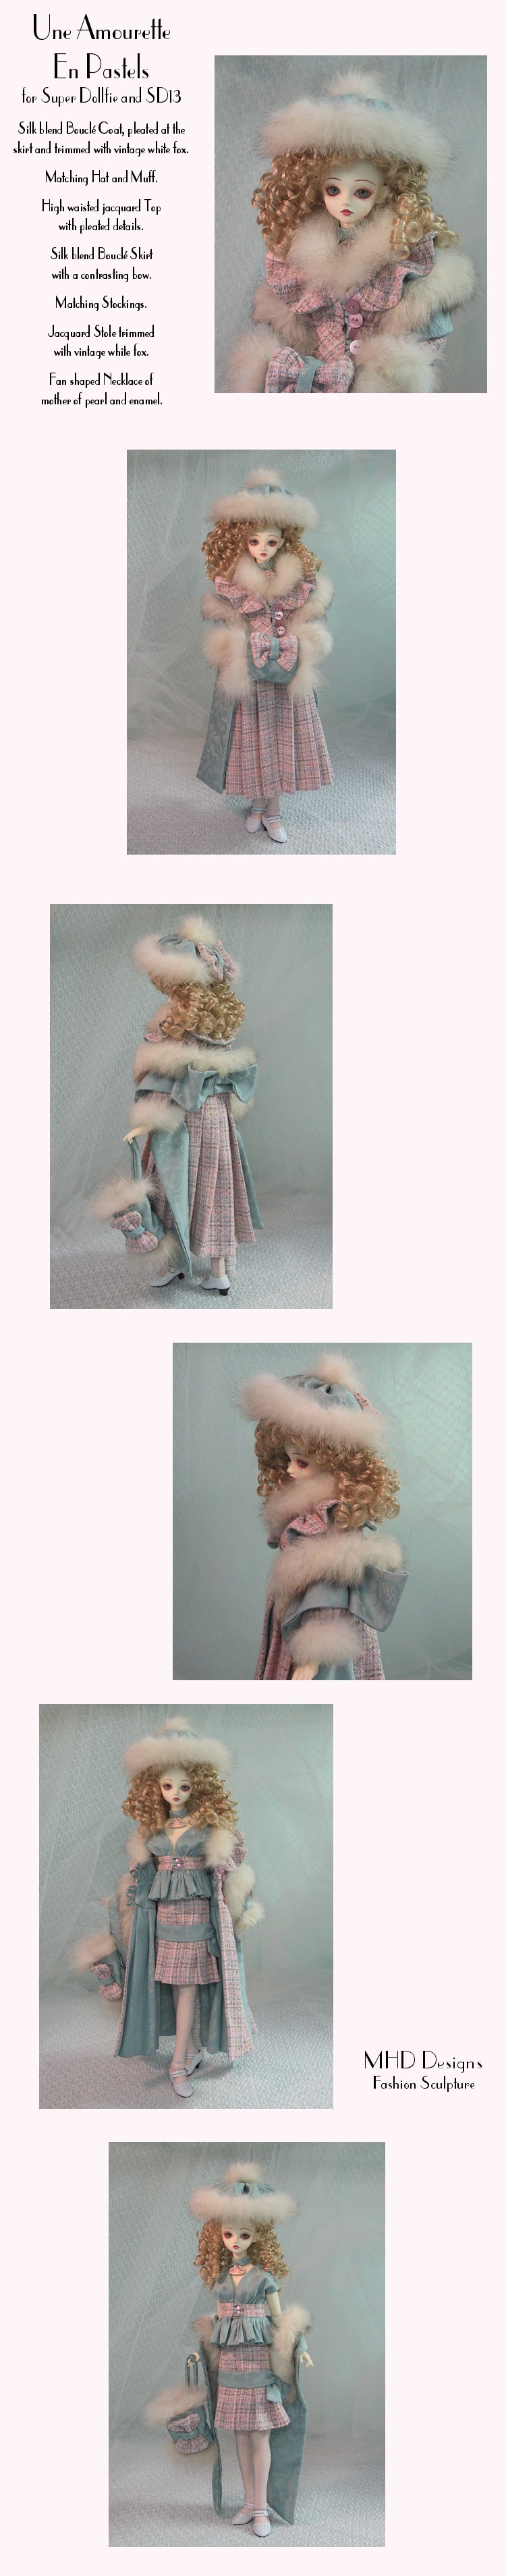 MHD Designs - A Love Affair With Pastels  - for Super Dollfie or SD13 Girls